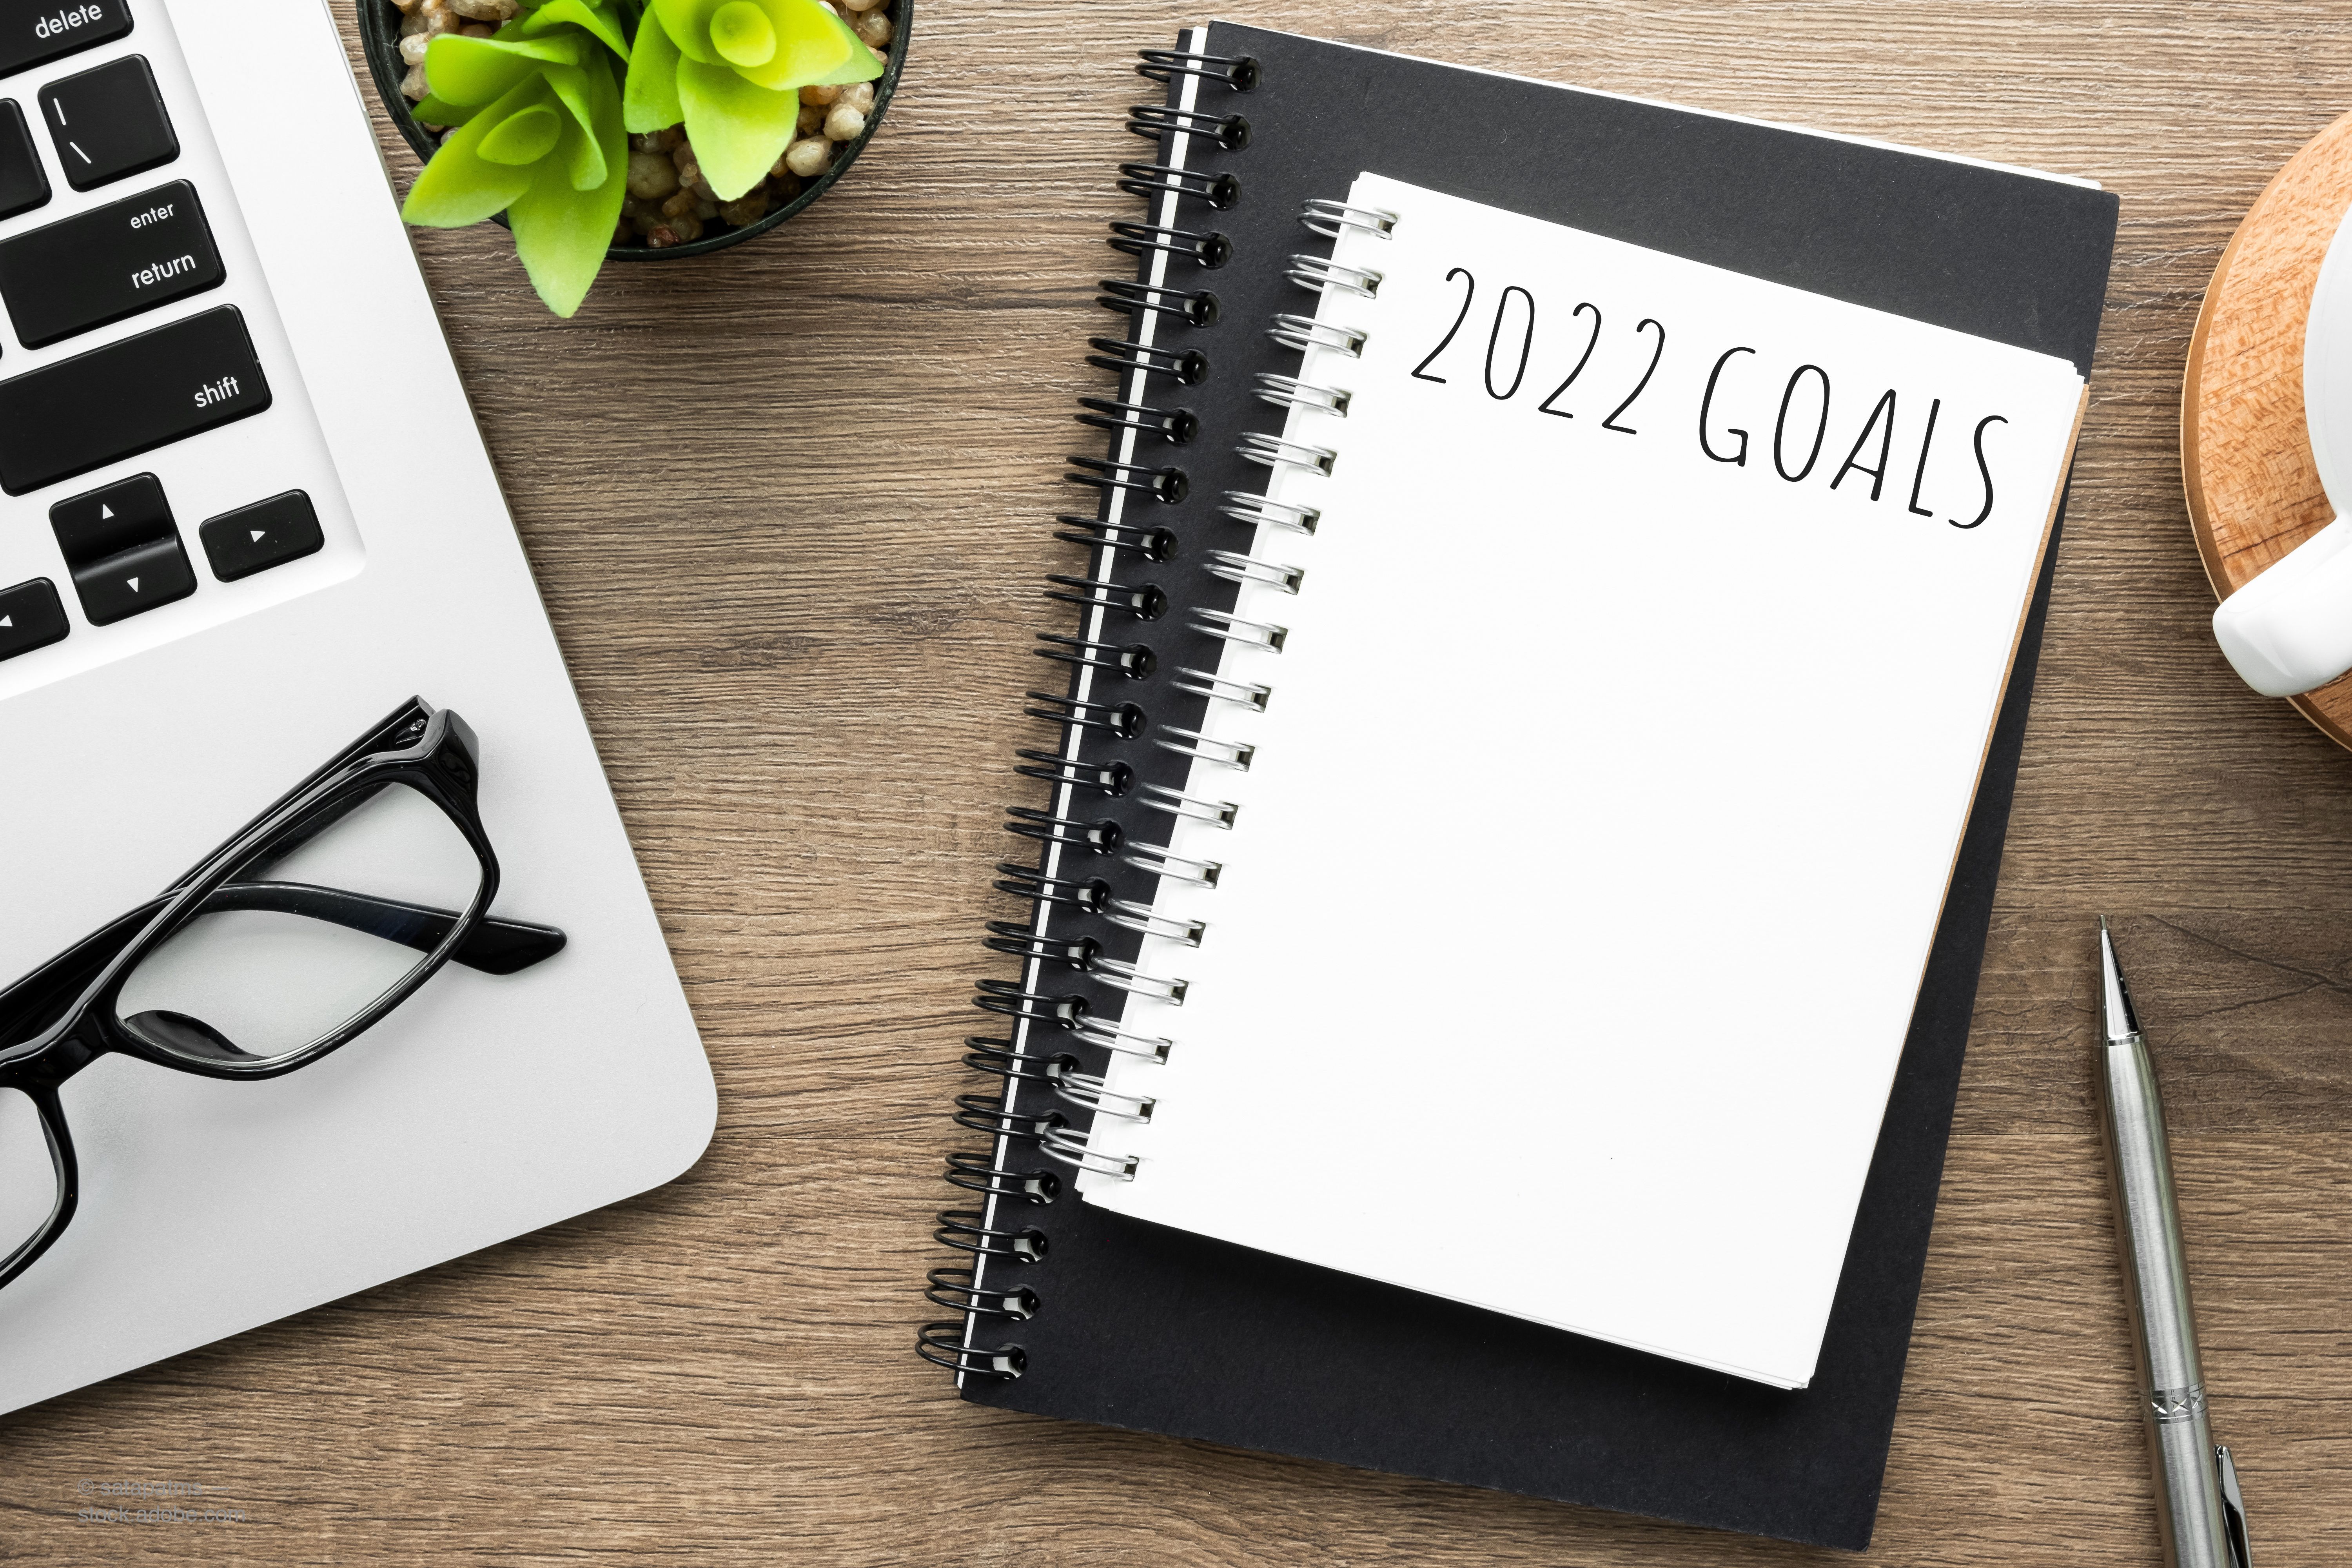 Five resolutions for 2022: New year brings promise of making good on goals